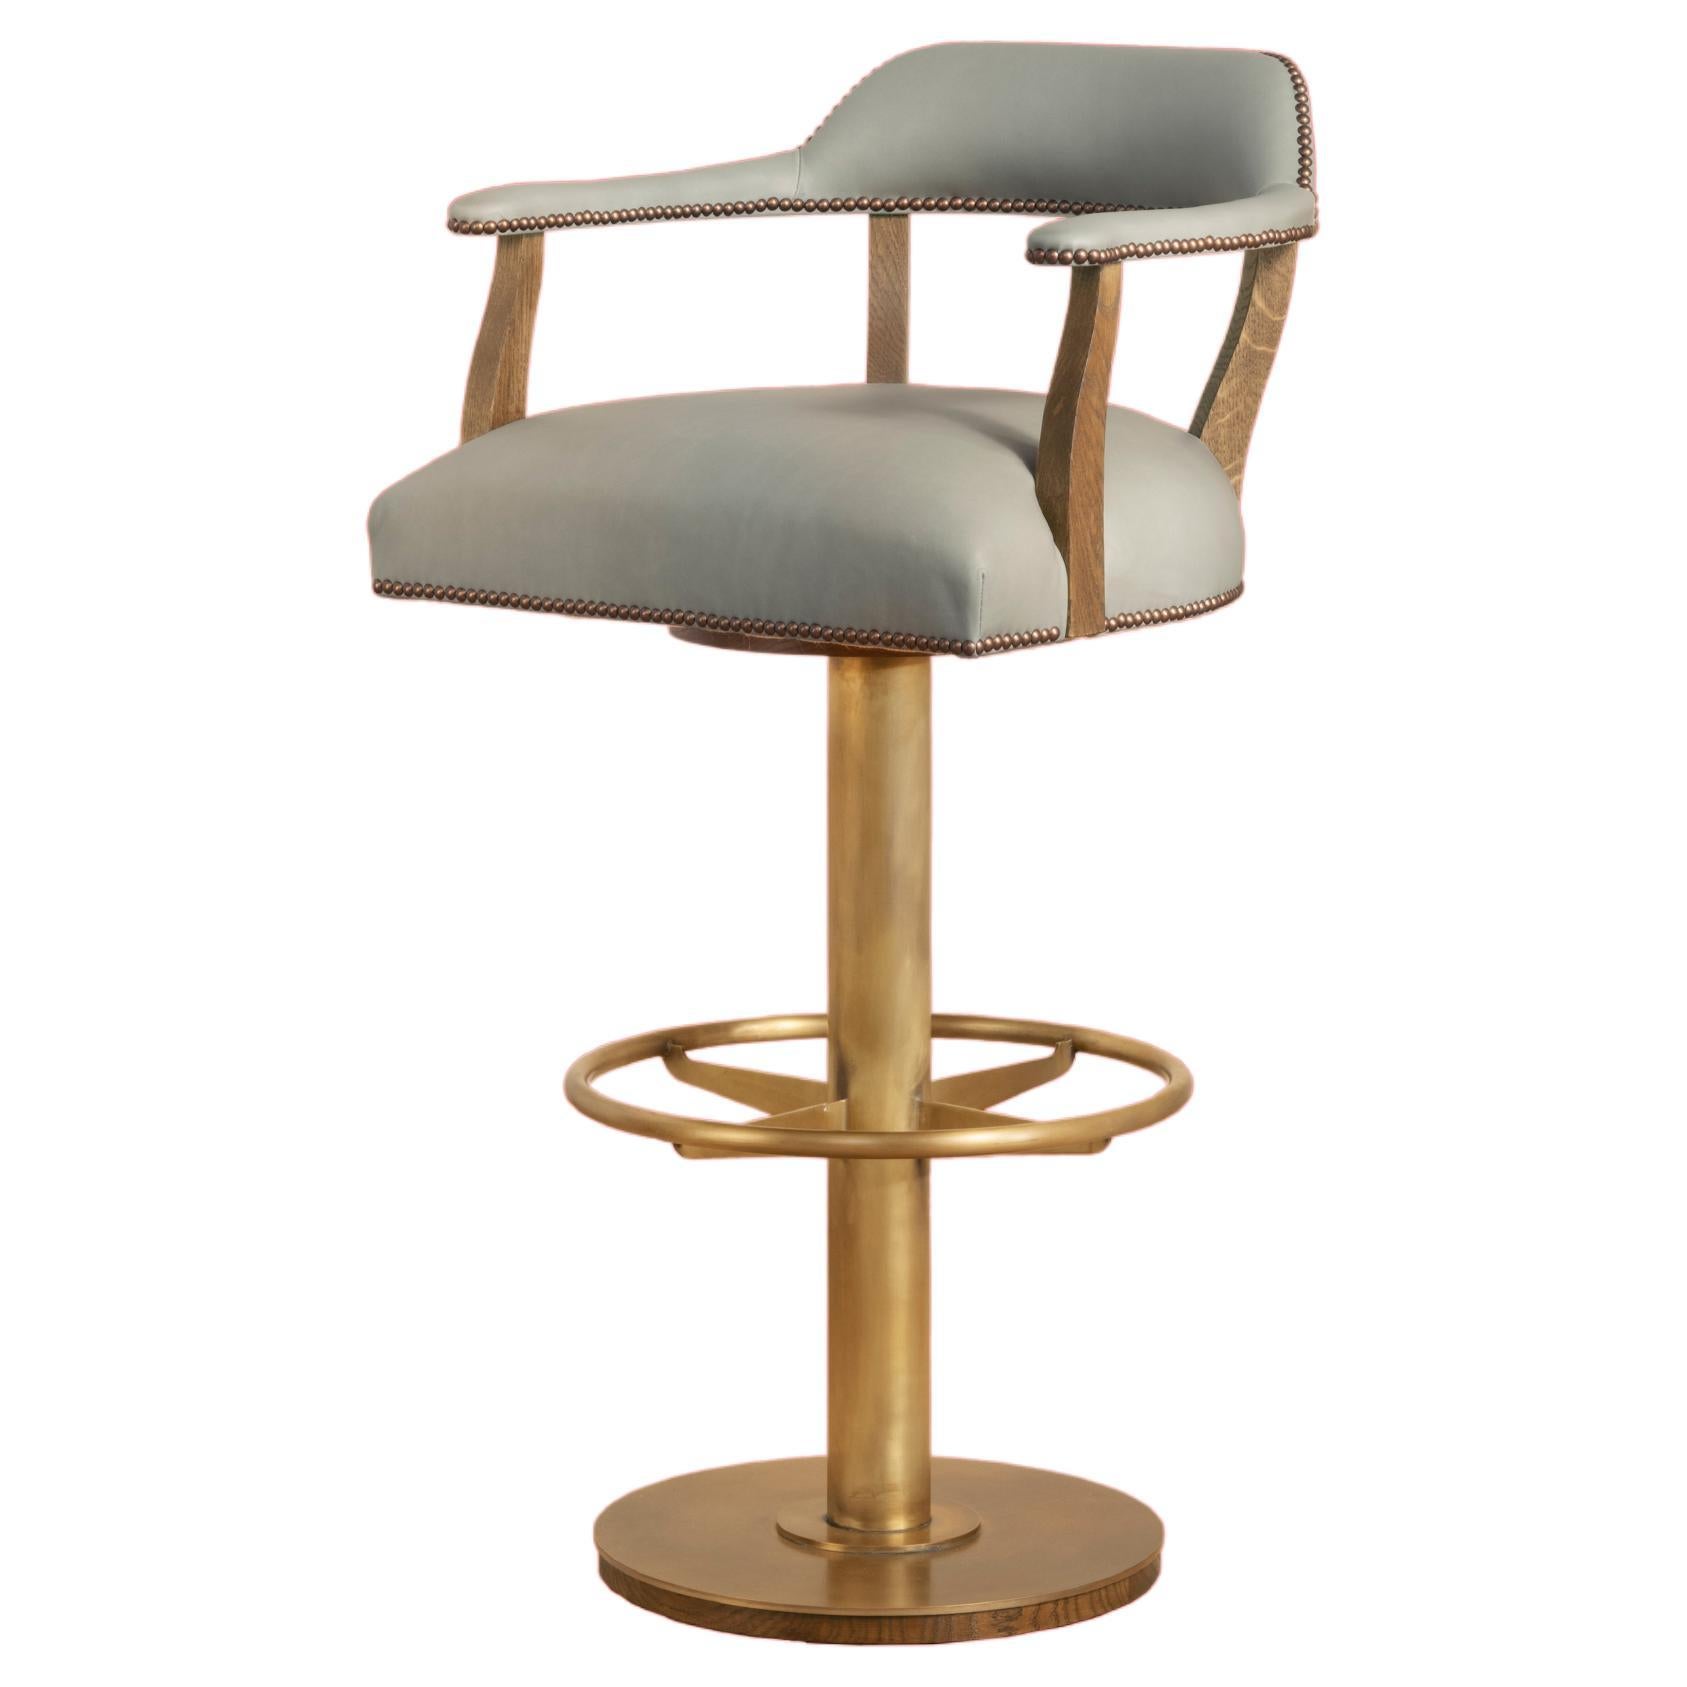 Rupert Bevan Croft Barstool (in Customer's Own choice of Material/Leather) For Sale